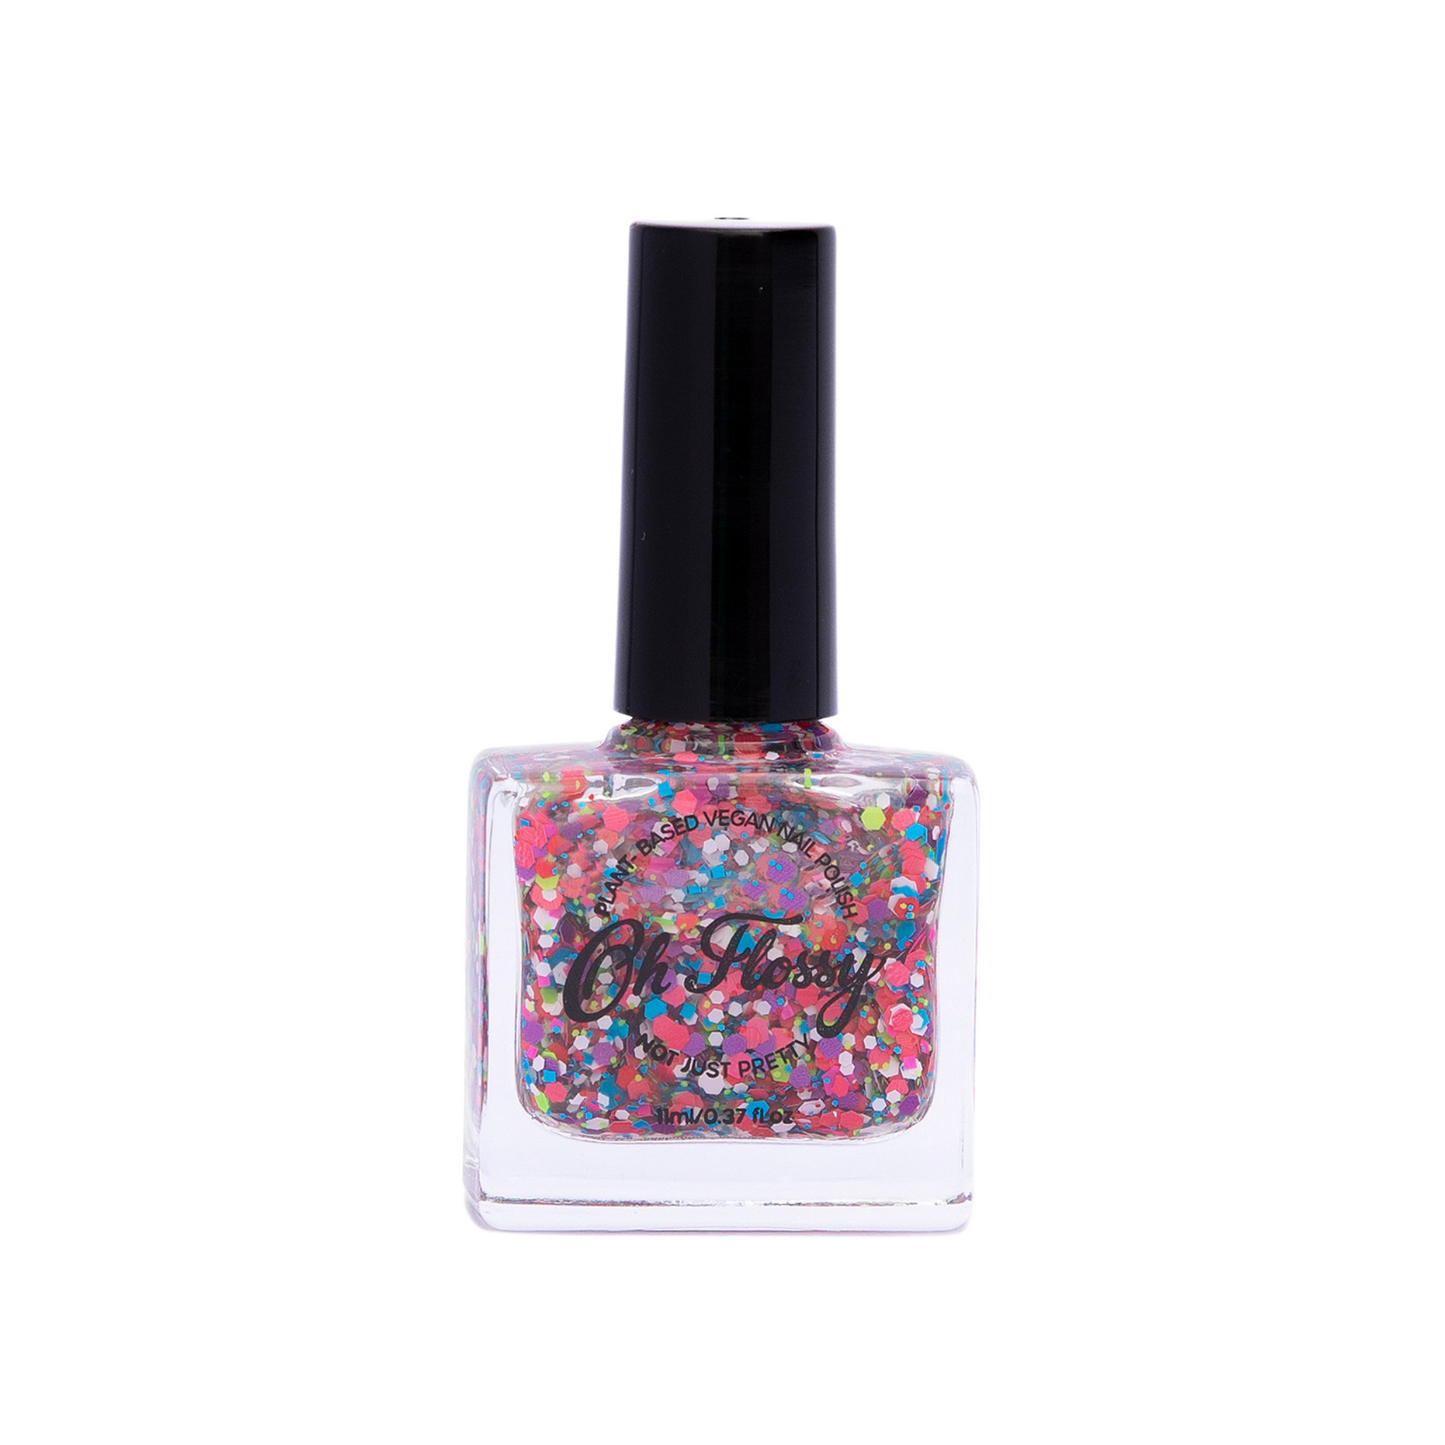 Oh Flossy Nail Polish- Courageous - Coloured Confetti Glitter